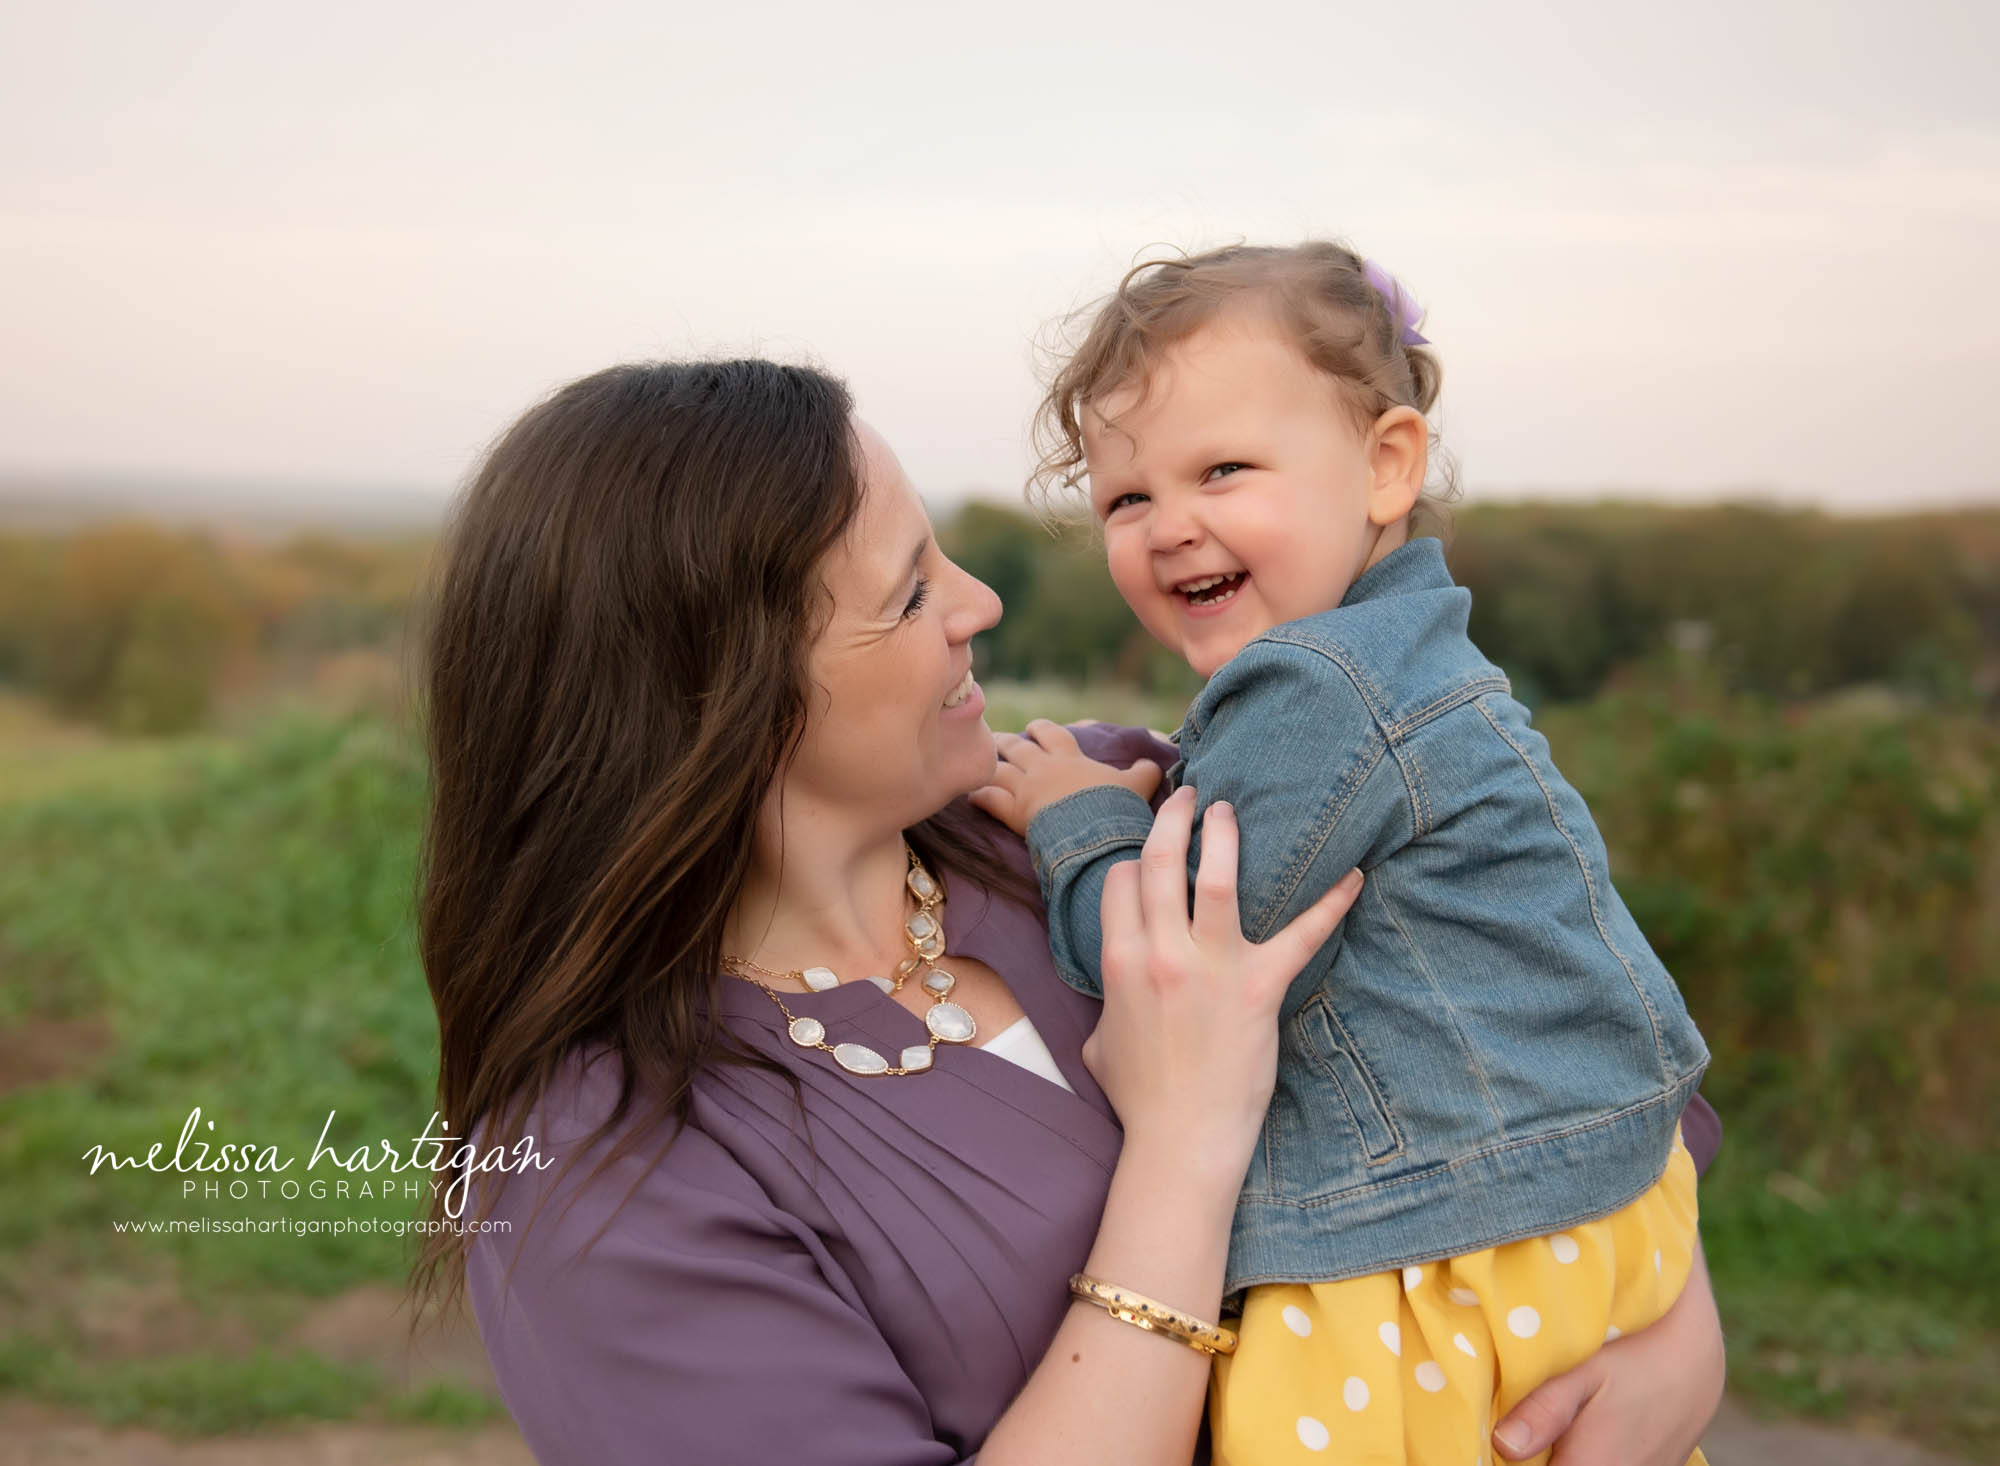 mom holding toddler daughter smiling and laughing together